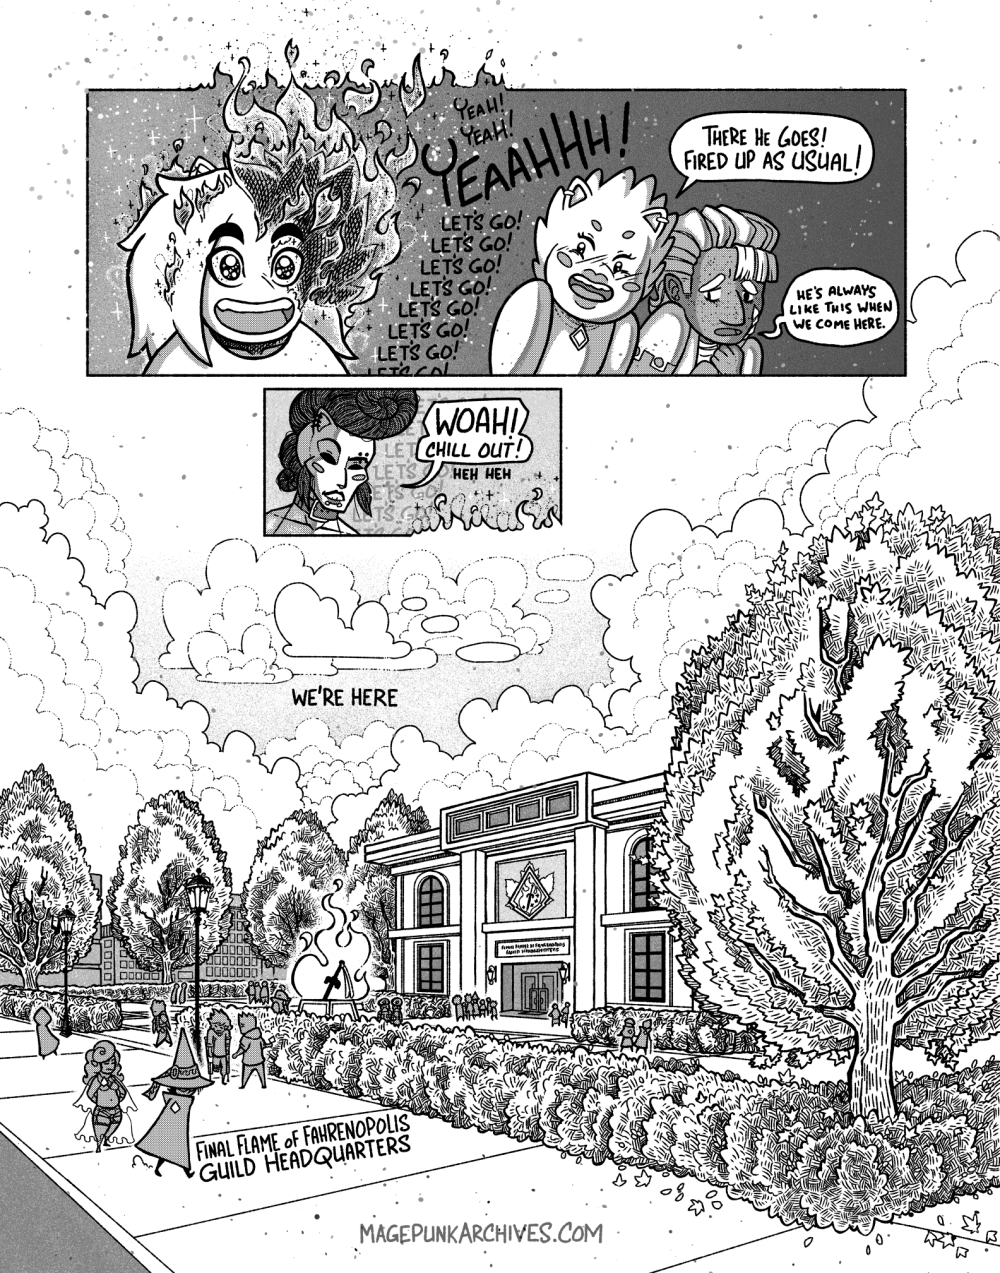 Let’s Go! Mage Punk and the Final Flame! – Page 8